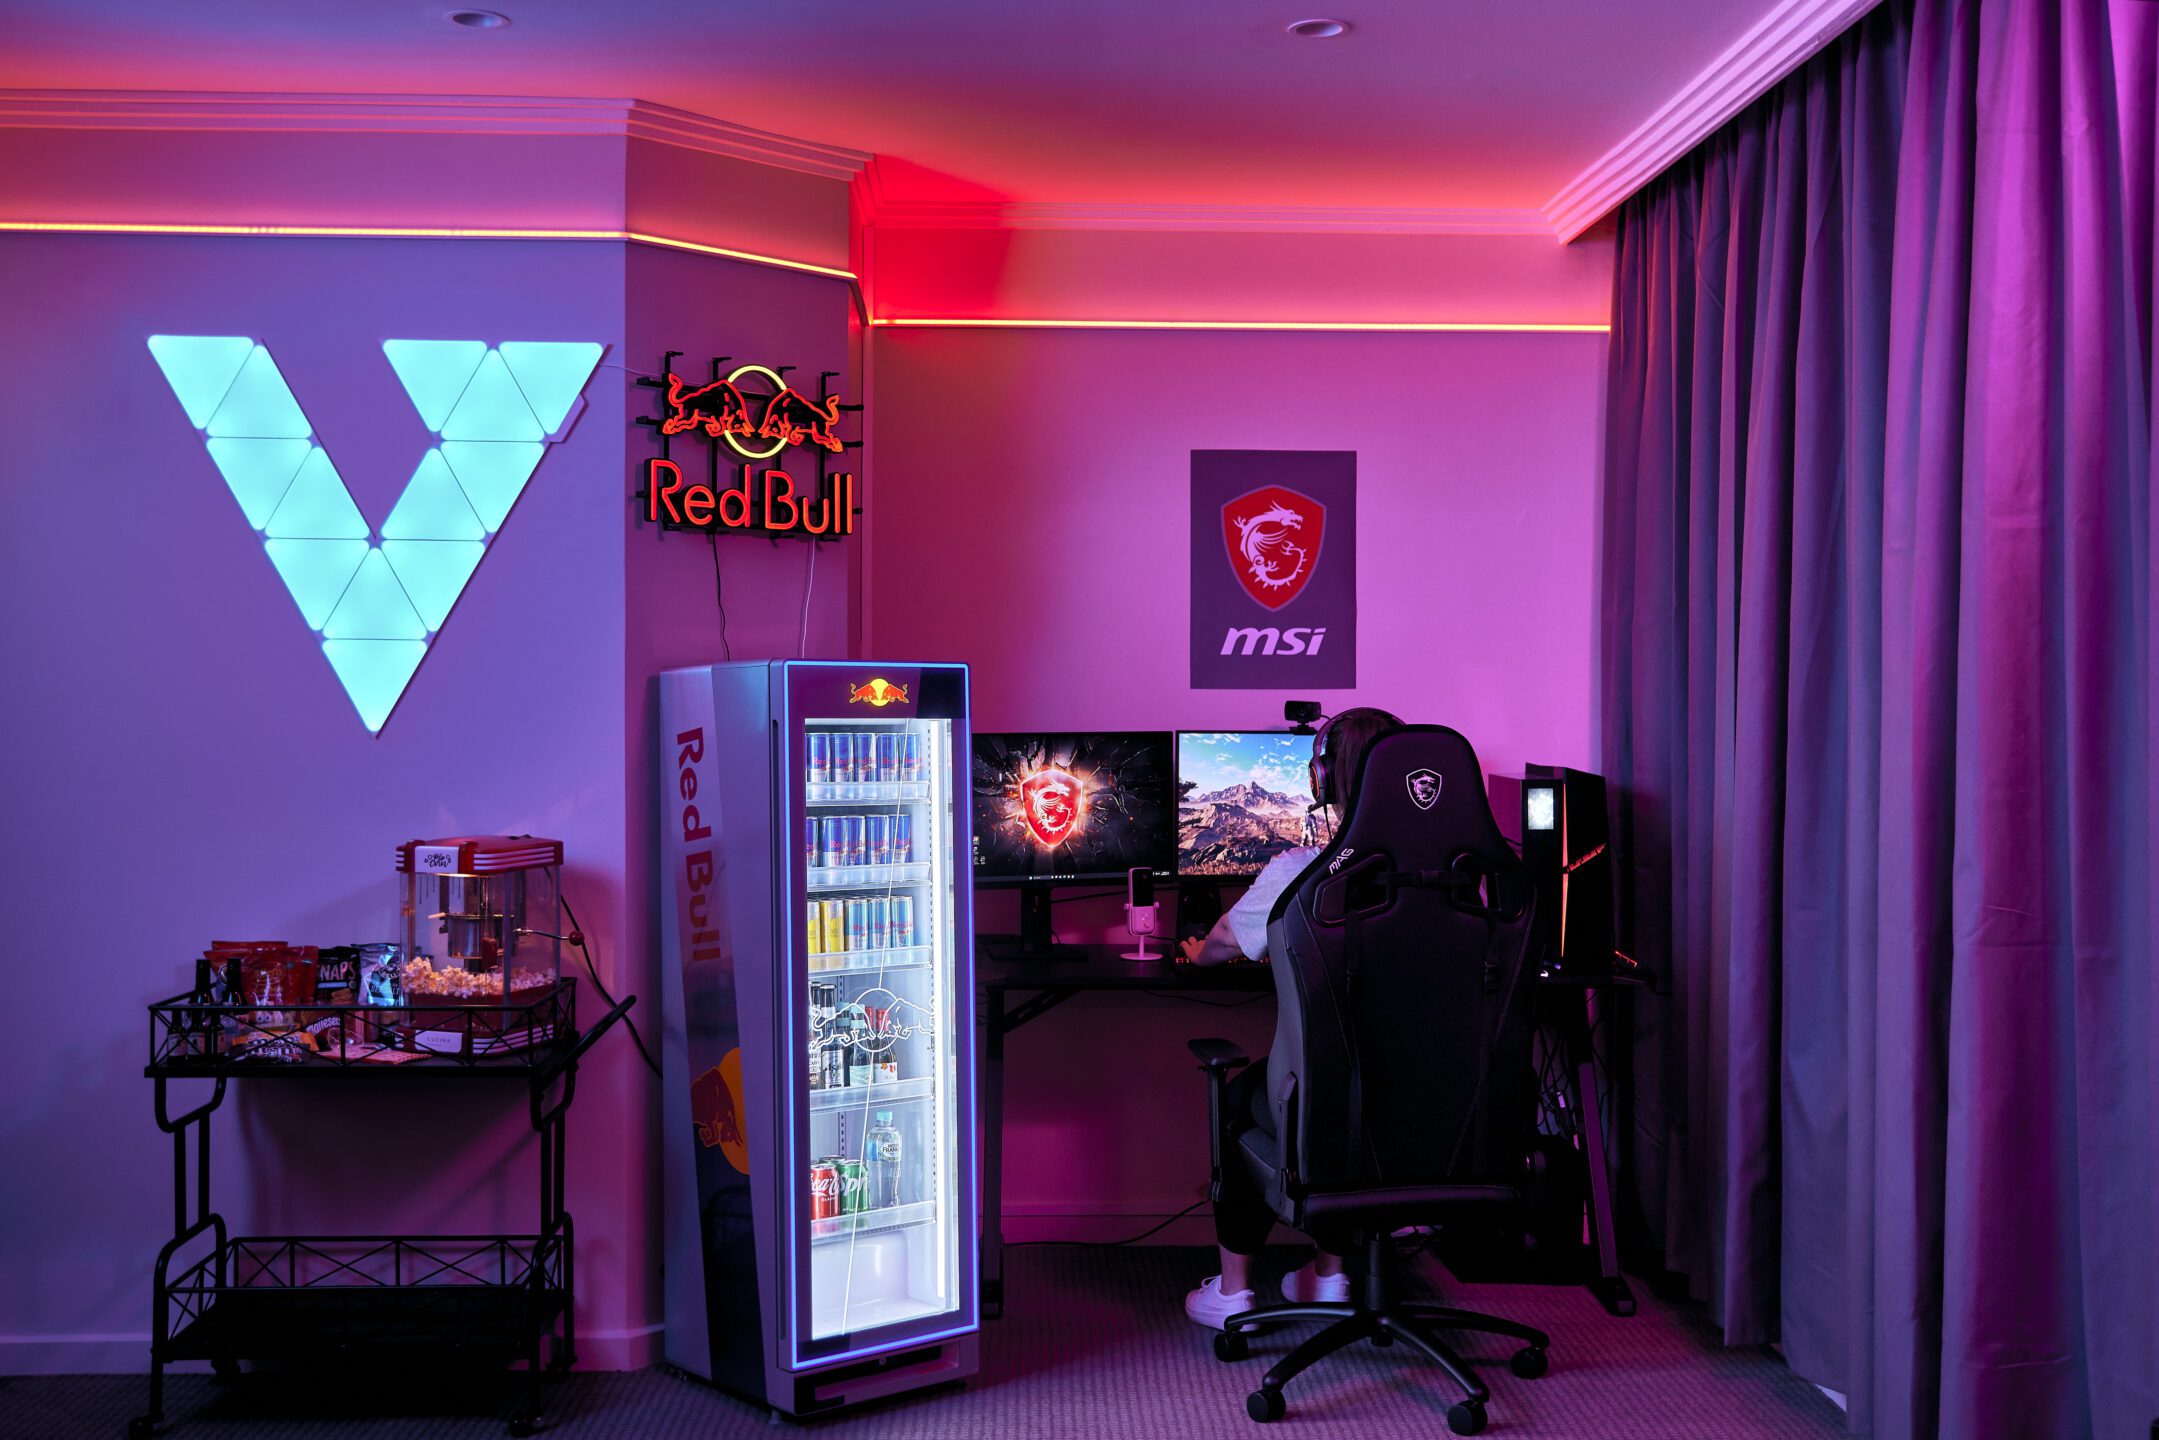 View Hotel - Gaming Room